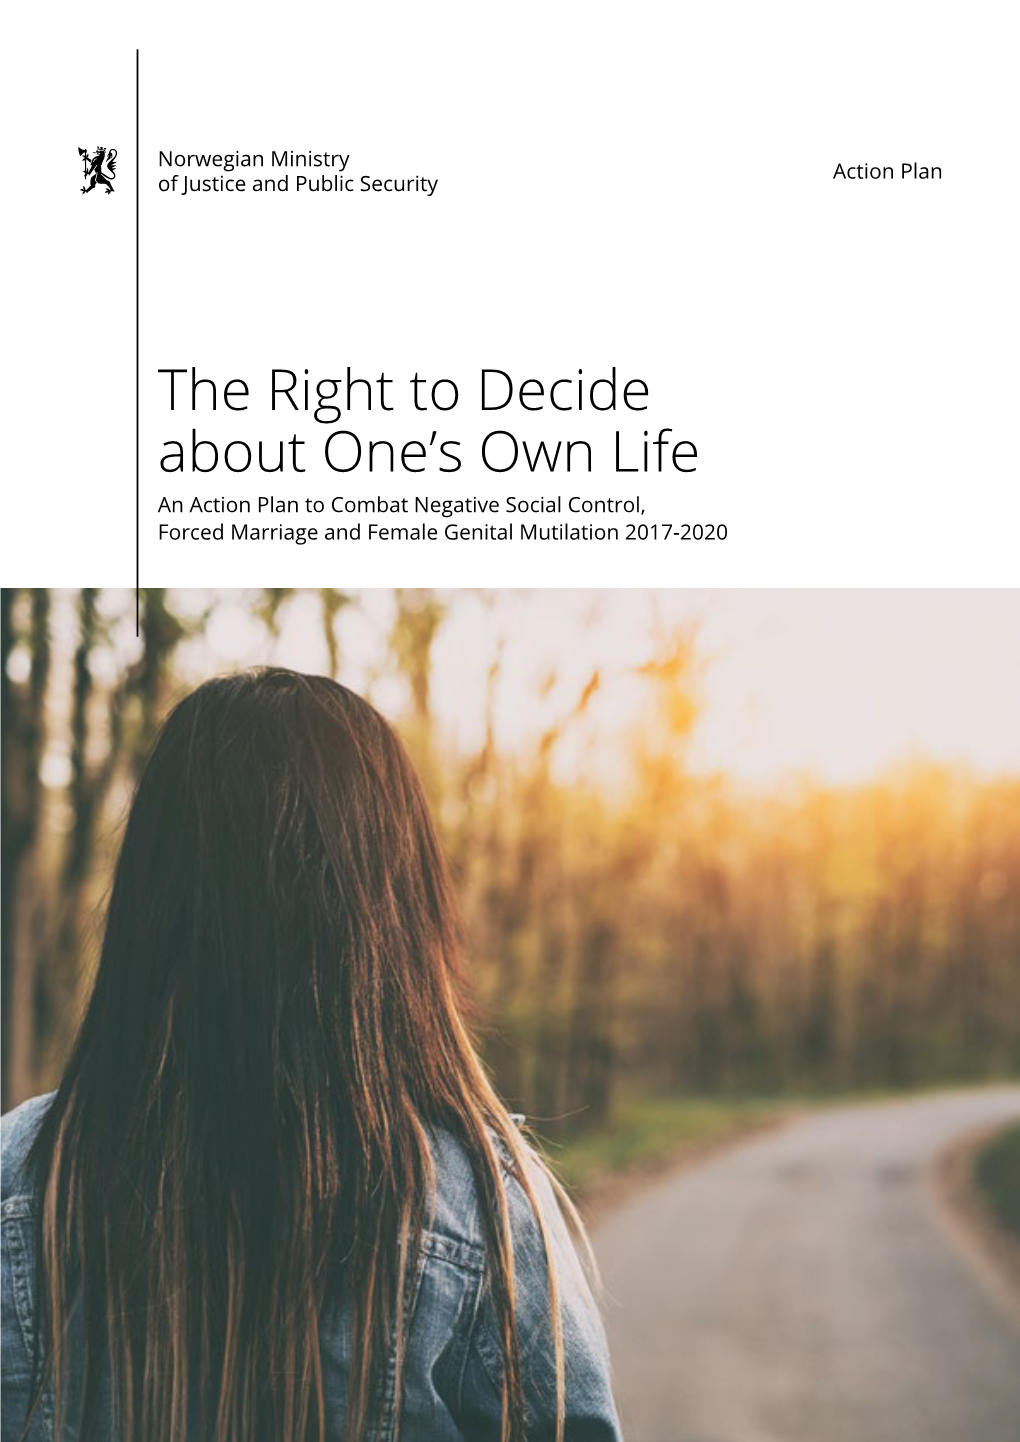 The Right to Decide About One's Own Life